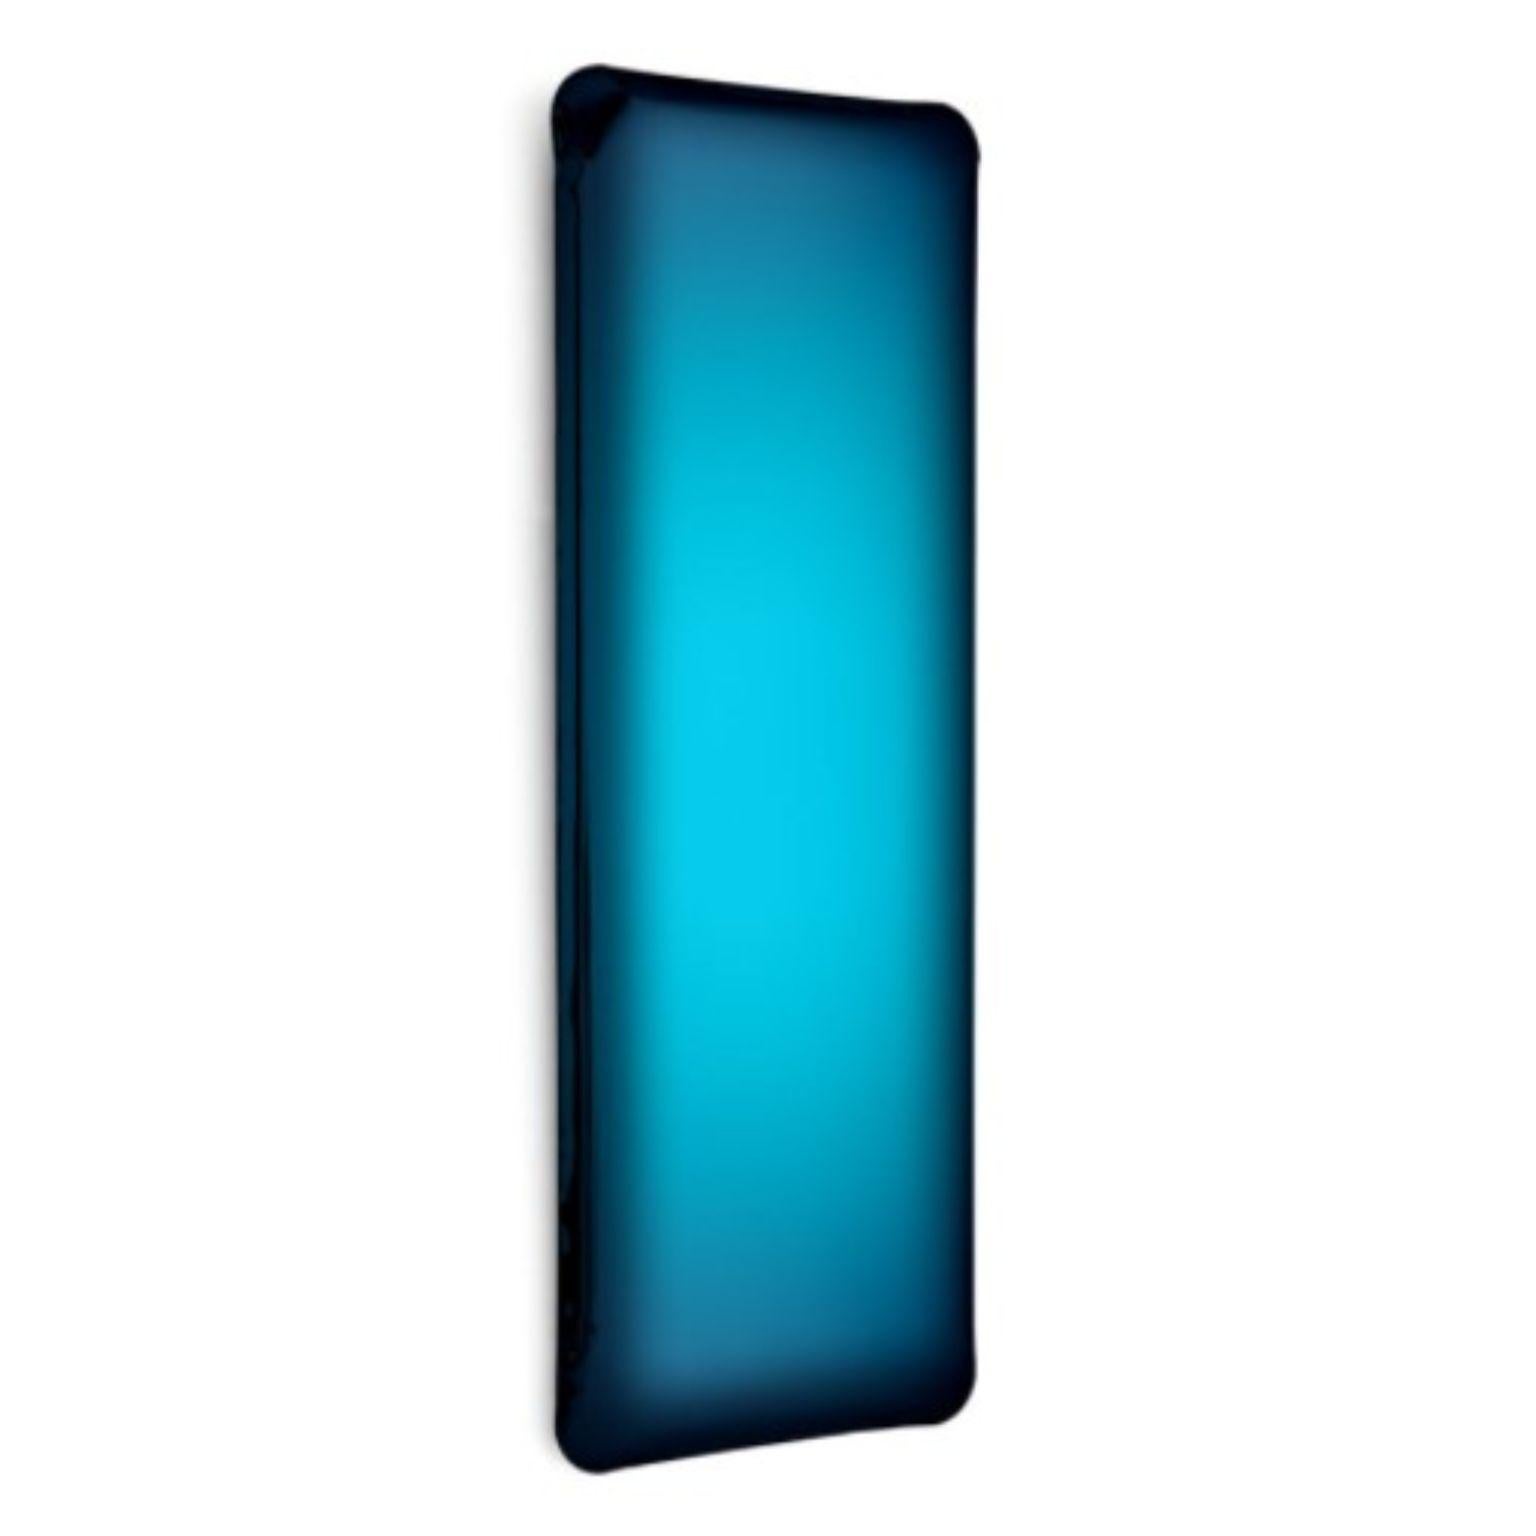 Deep space blue tafla Q1 Sculptural wall mirror by Zieta
Dimensions: D 6 x W 60 x H 180 cm 
Material: Stainless steel. 
Finish: Deep Space Blue.
Available in finishes: Stainless Steel, Deep Space Blue, Emerald, Saphire, Saphire/Emerald, Dark Matter,